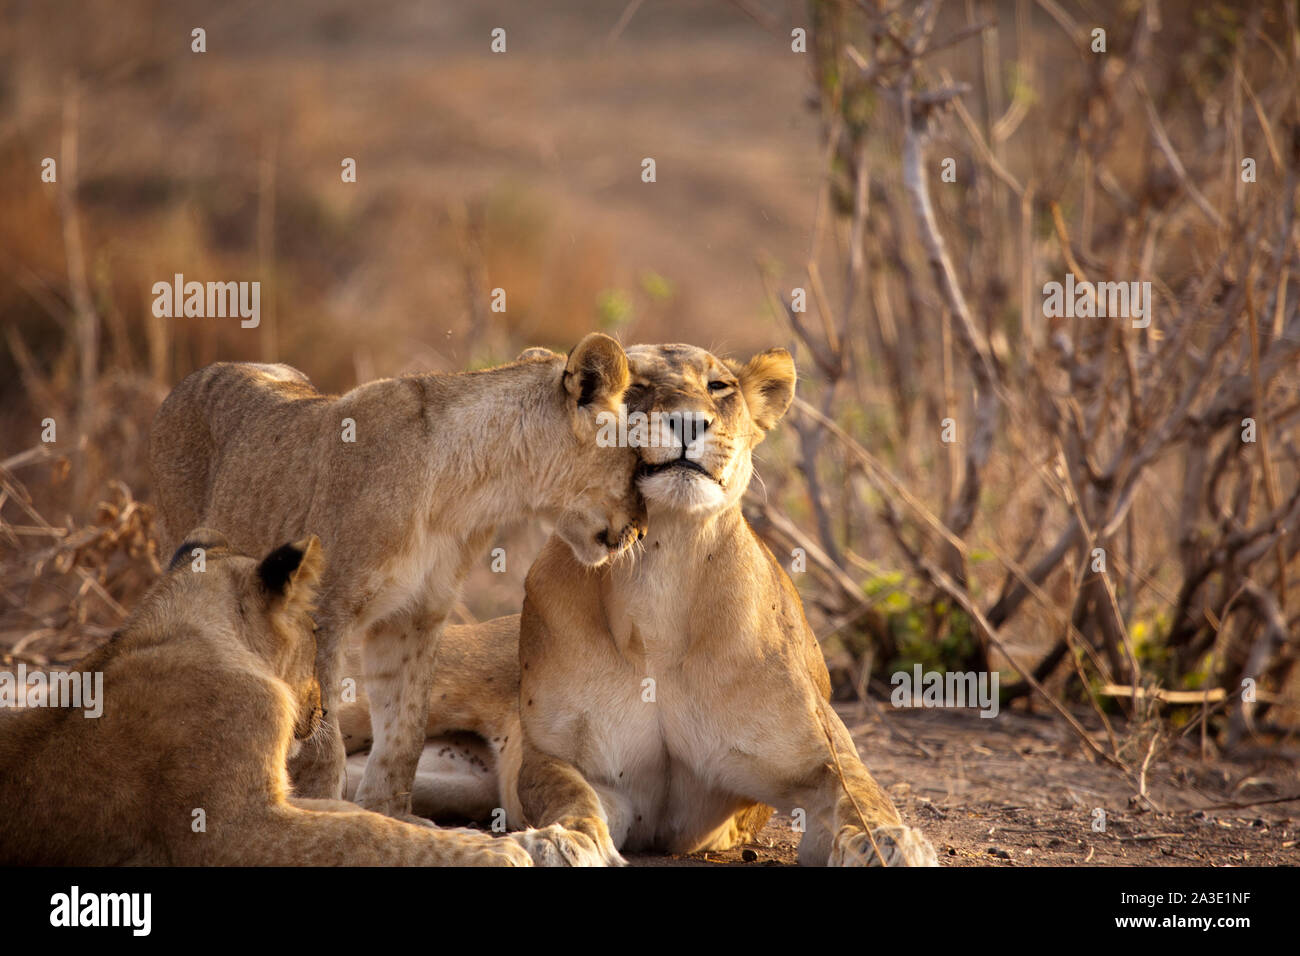 Cub nuzzling adult lioness as an early morning greeting, Ruaha National Park, Tanzania Stock Photo